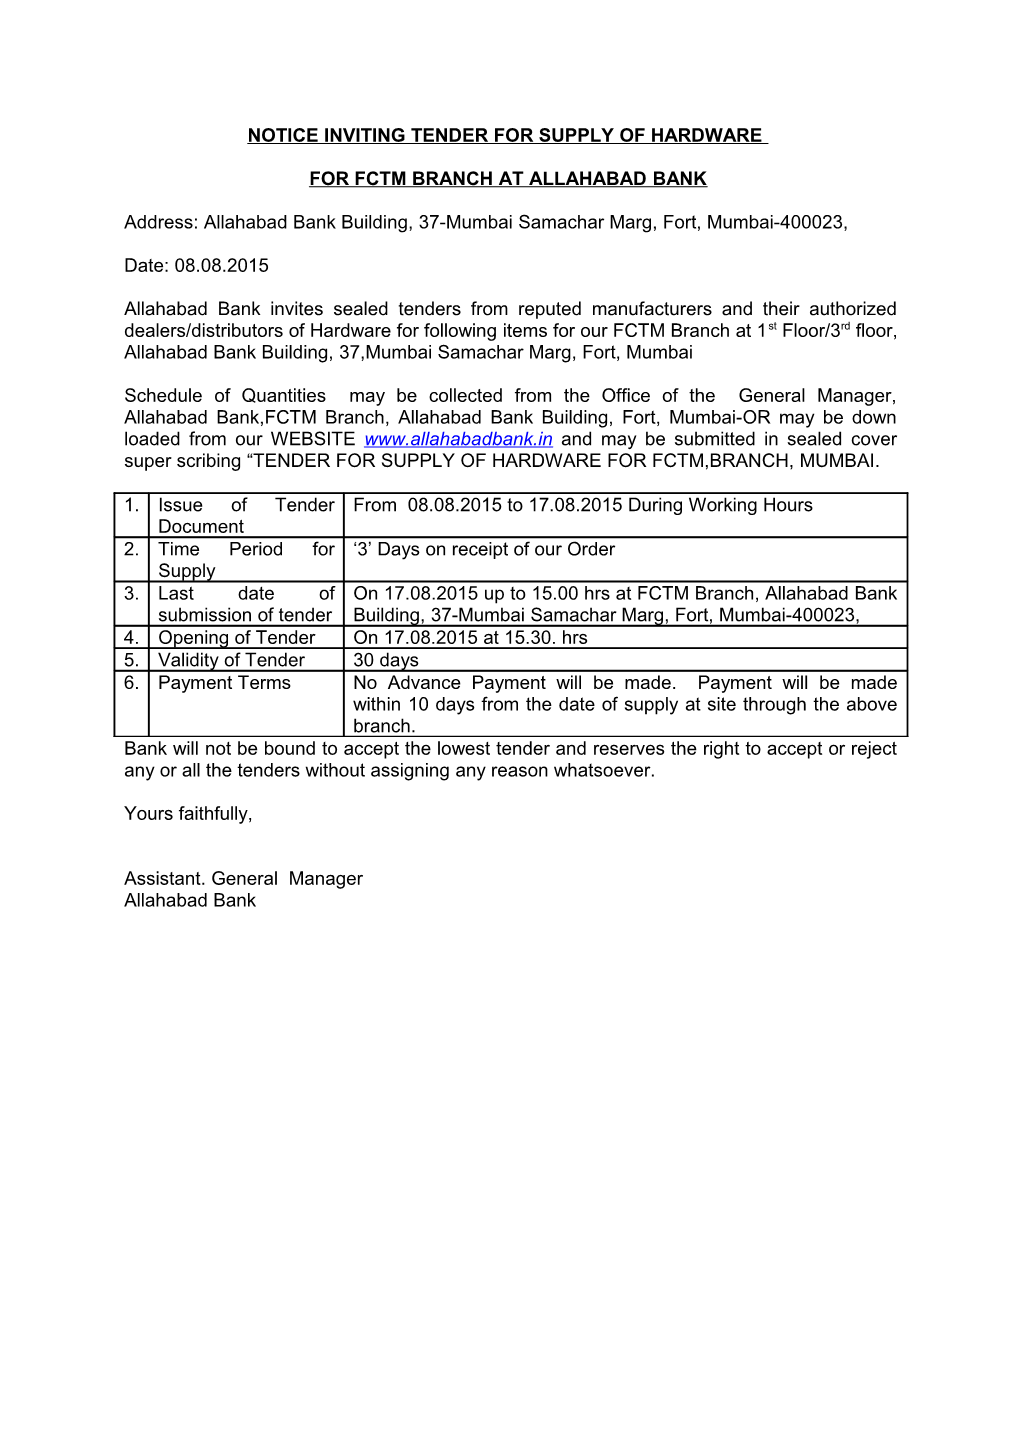 Notice Inviting Tender for Supply of Hardware